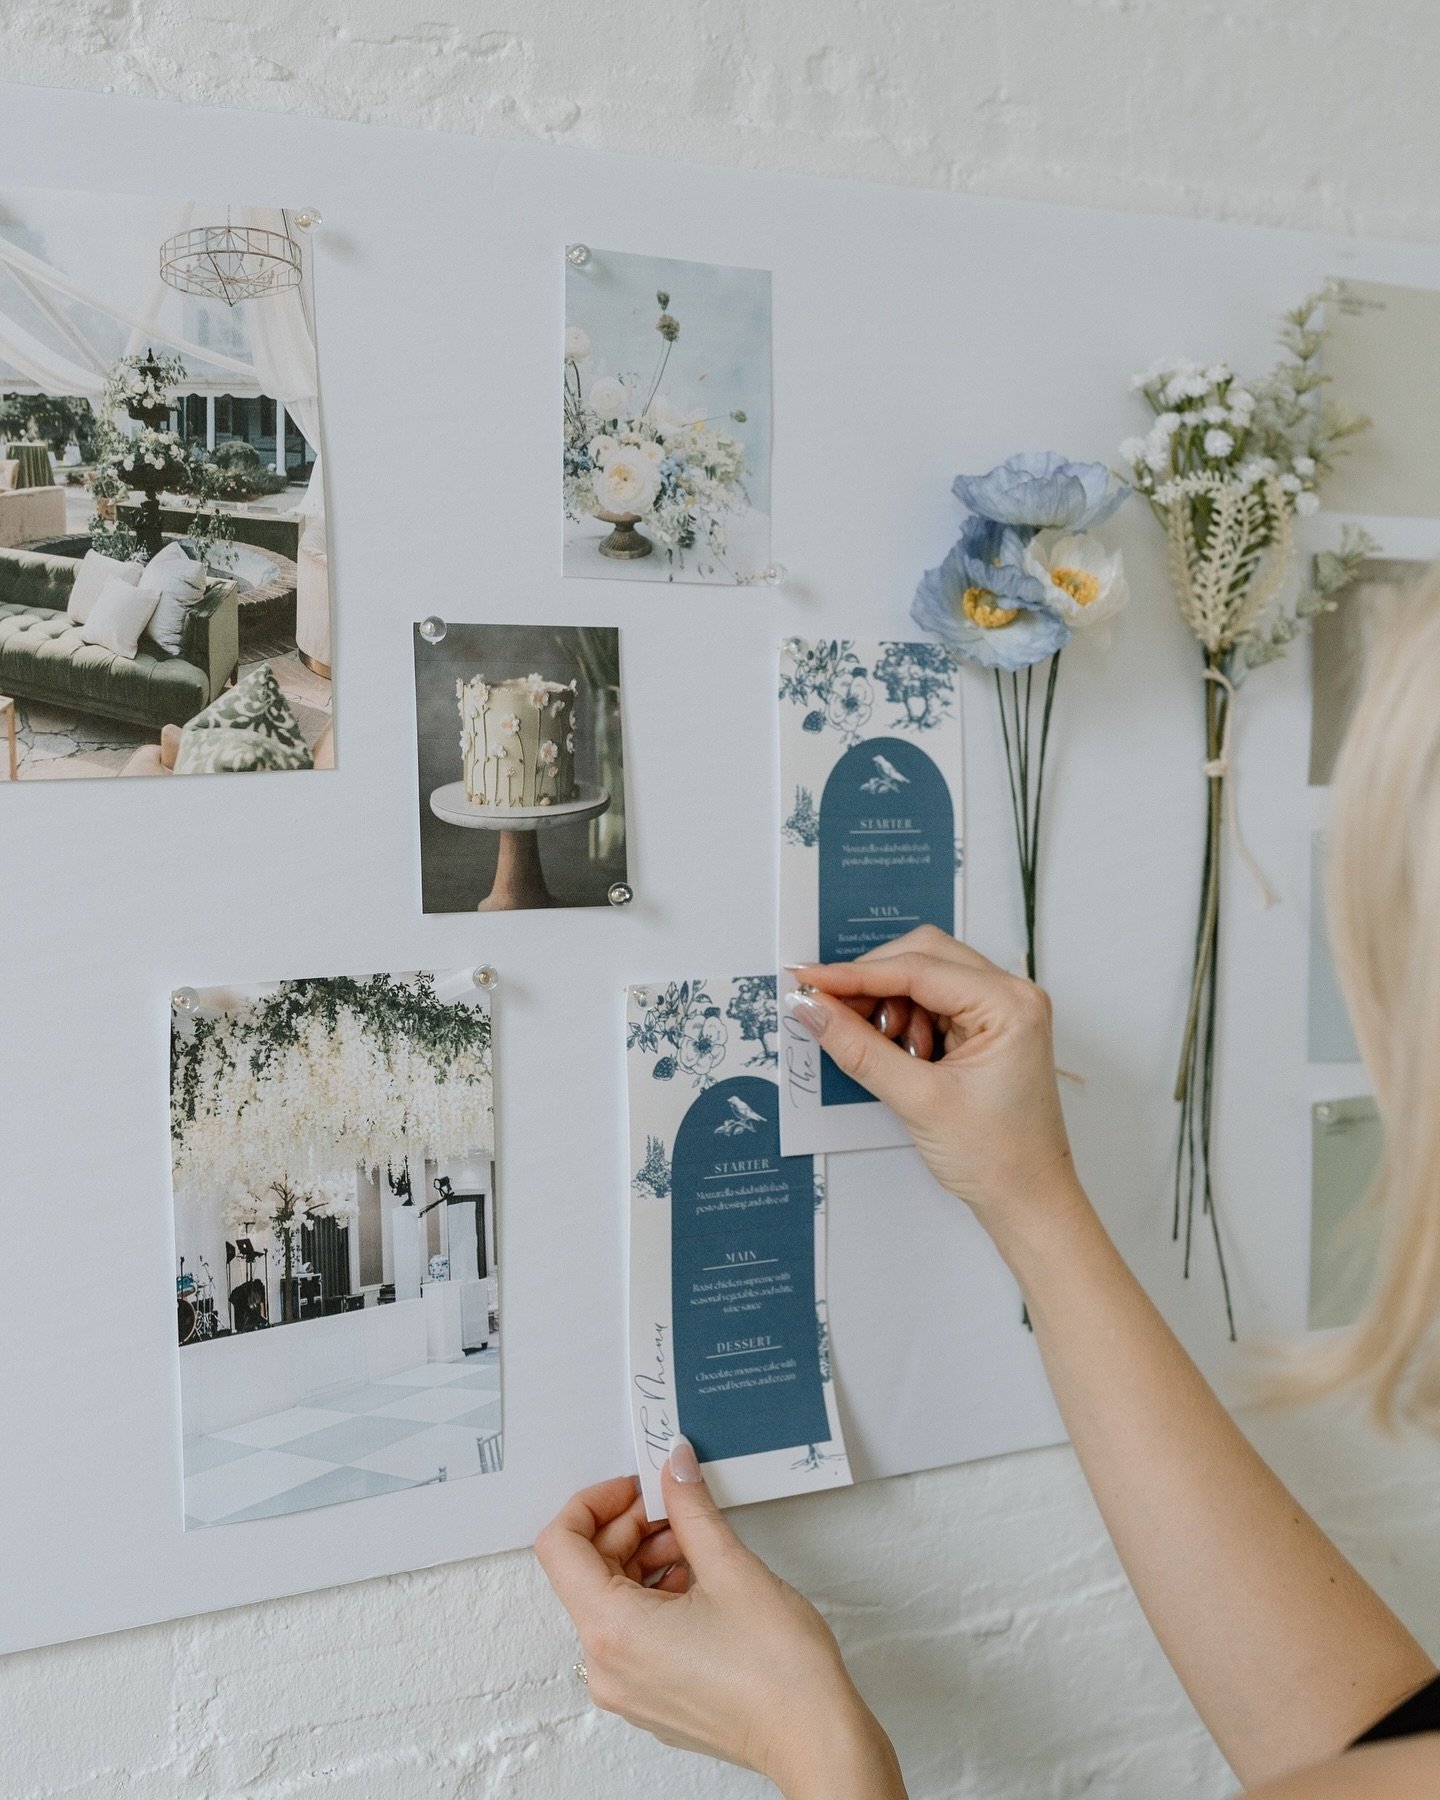 Ever thought, &ldquo;I wish someone could make my event as dreamy as my Pinterest board?&rdquo; 

It&rsquo;s me, I&rsquo;m that someone you&rsquo;re looking for. 💁🏼&zwj;♀️

Let&rsquo;s get started today and begin creating your dream Pinterest event